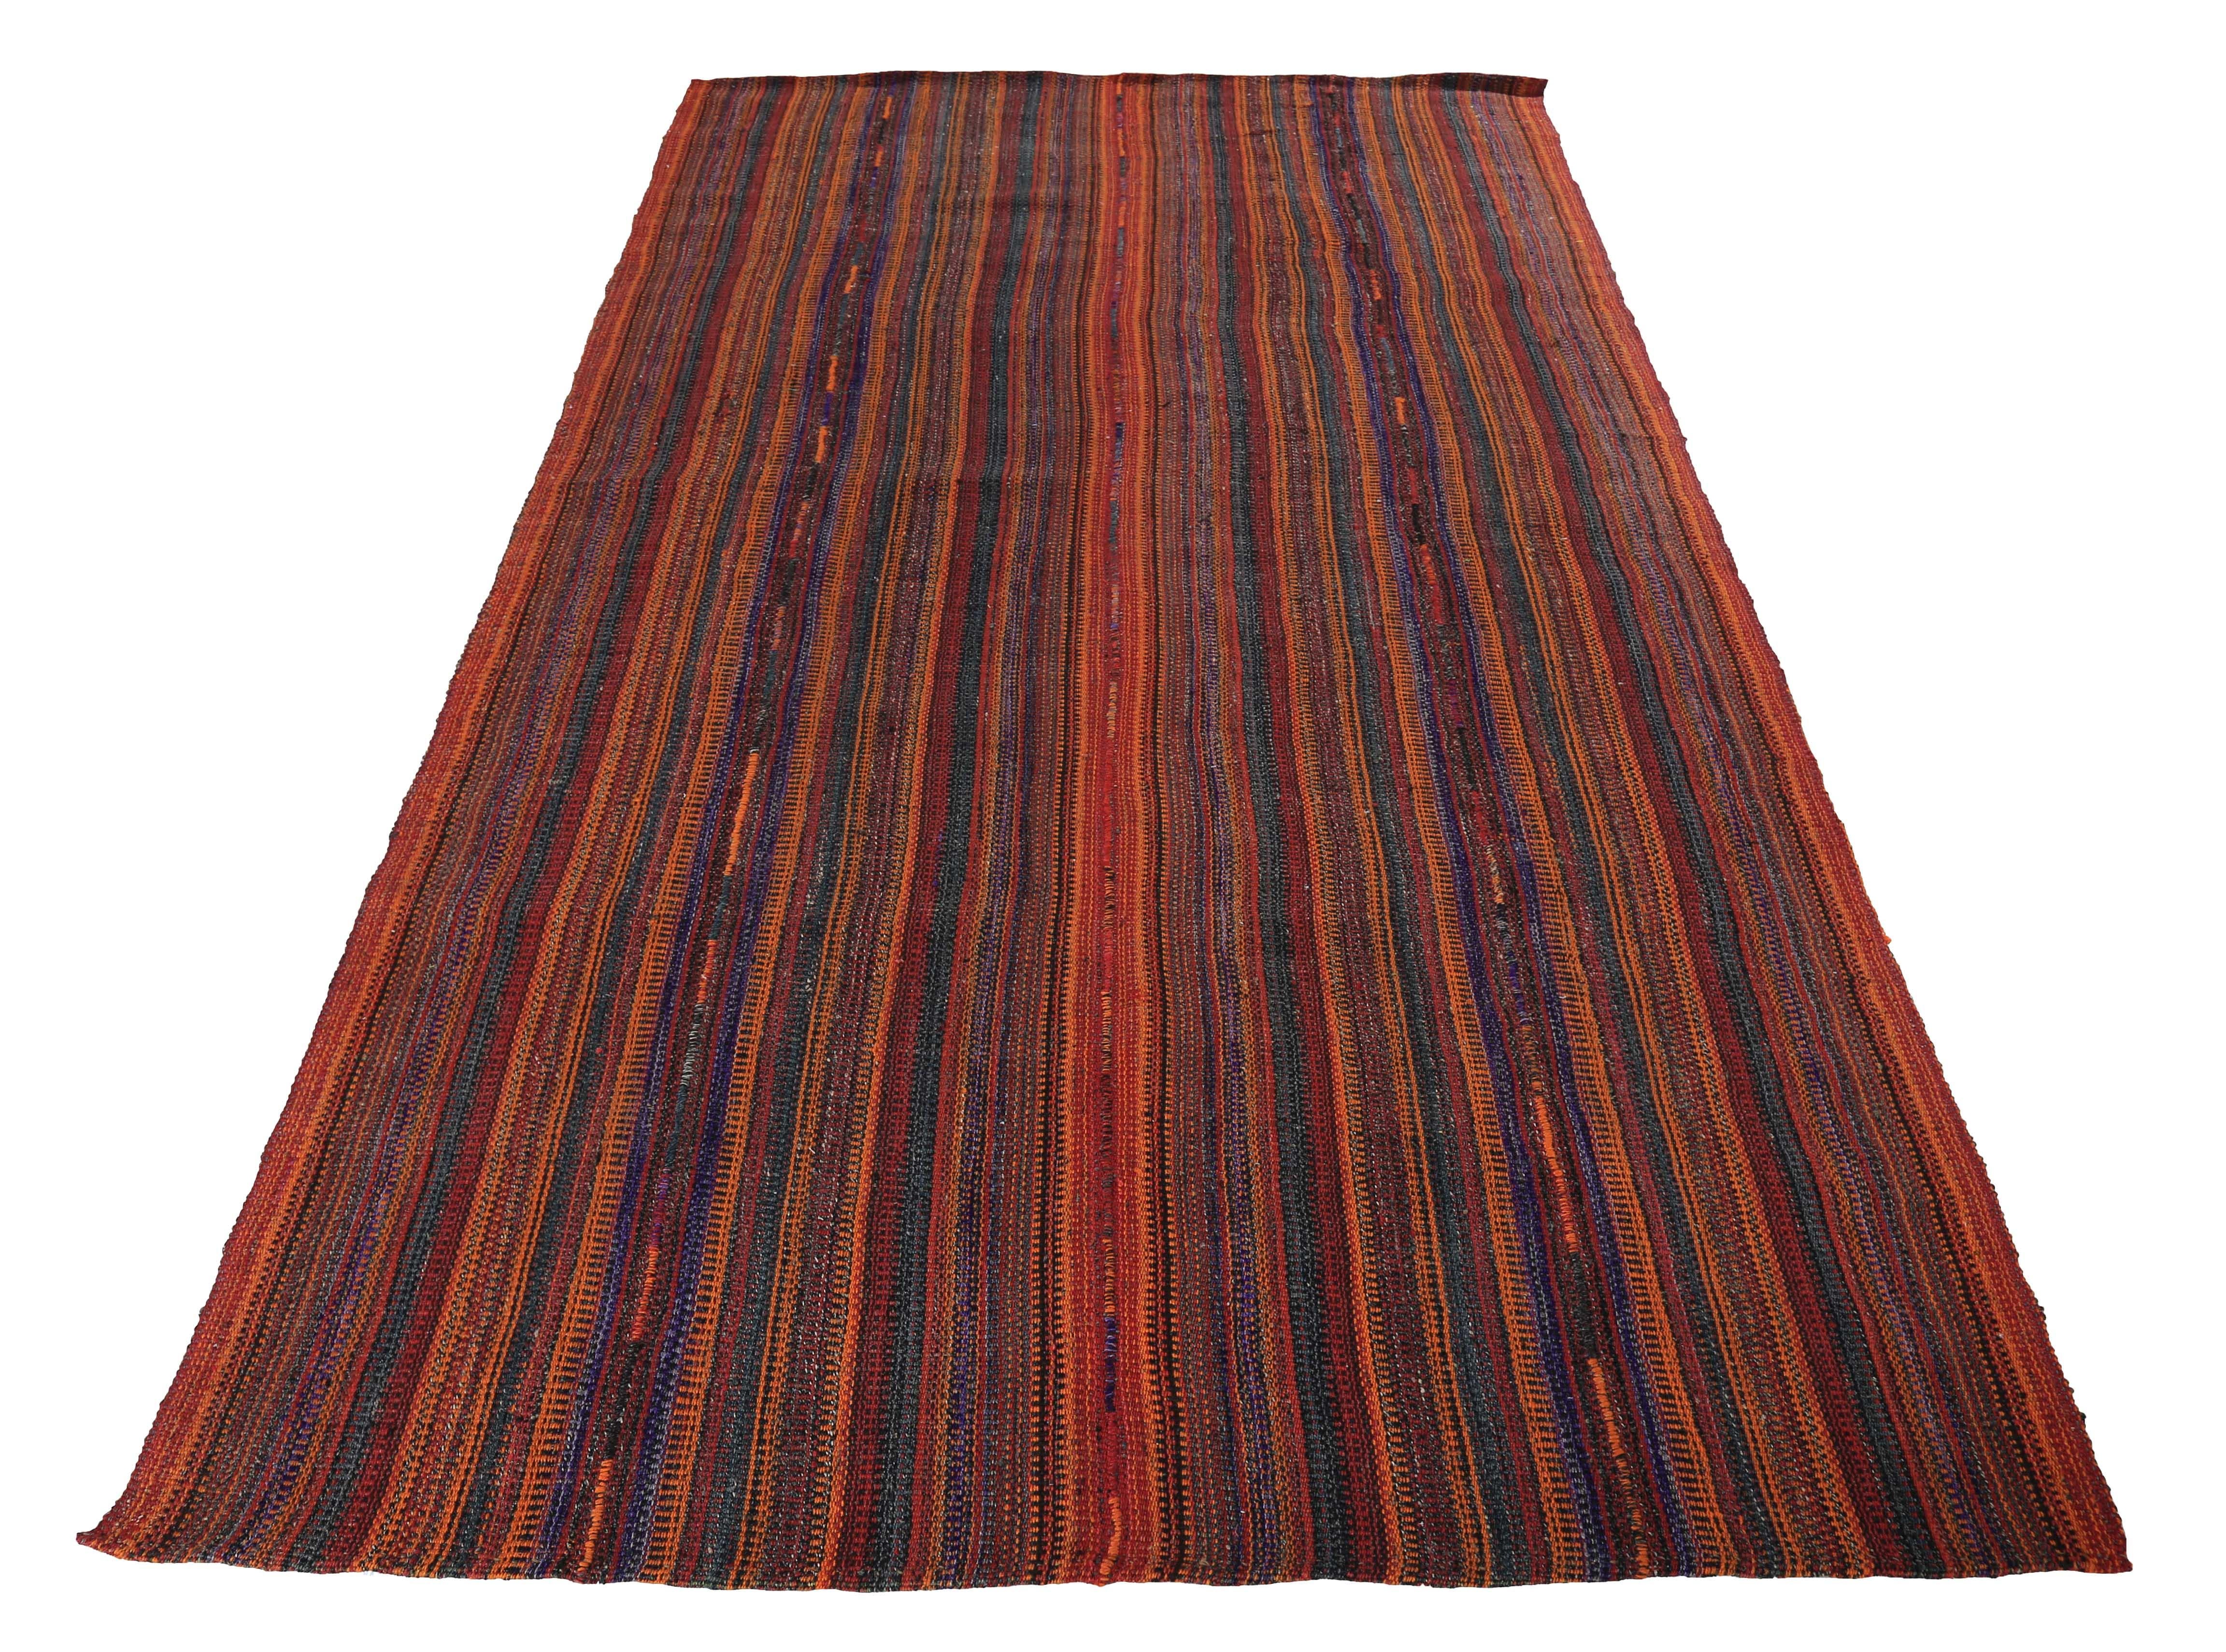 Turkish rug handwoven from the finest sheep’s wool and colored with all-natural vegetable dyes that are safe for humans and pets. It’s a traditional Kilim flat-weave design featuring a tribal design field with black and red stripes. It’s a stunning